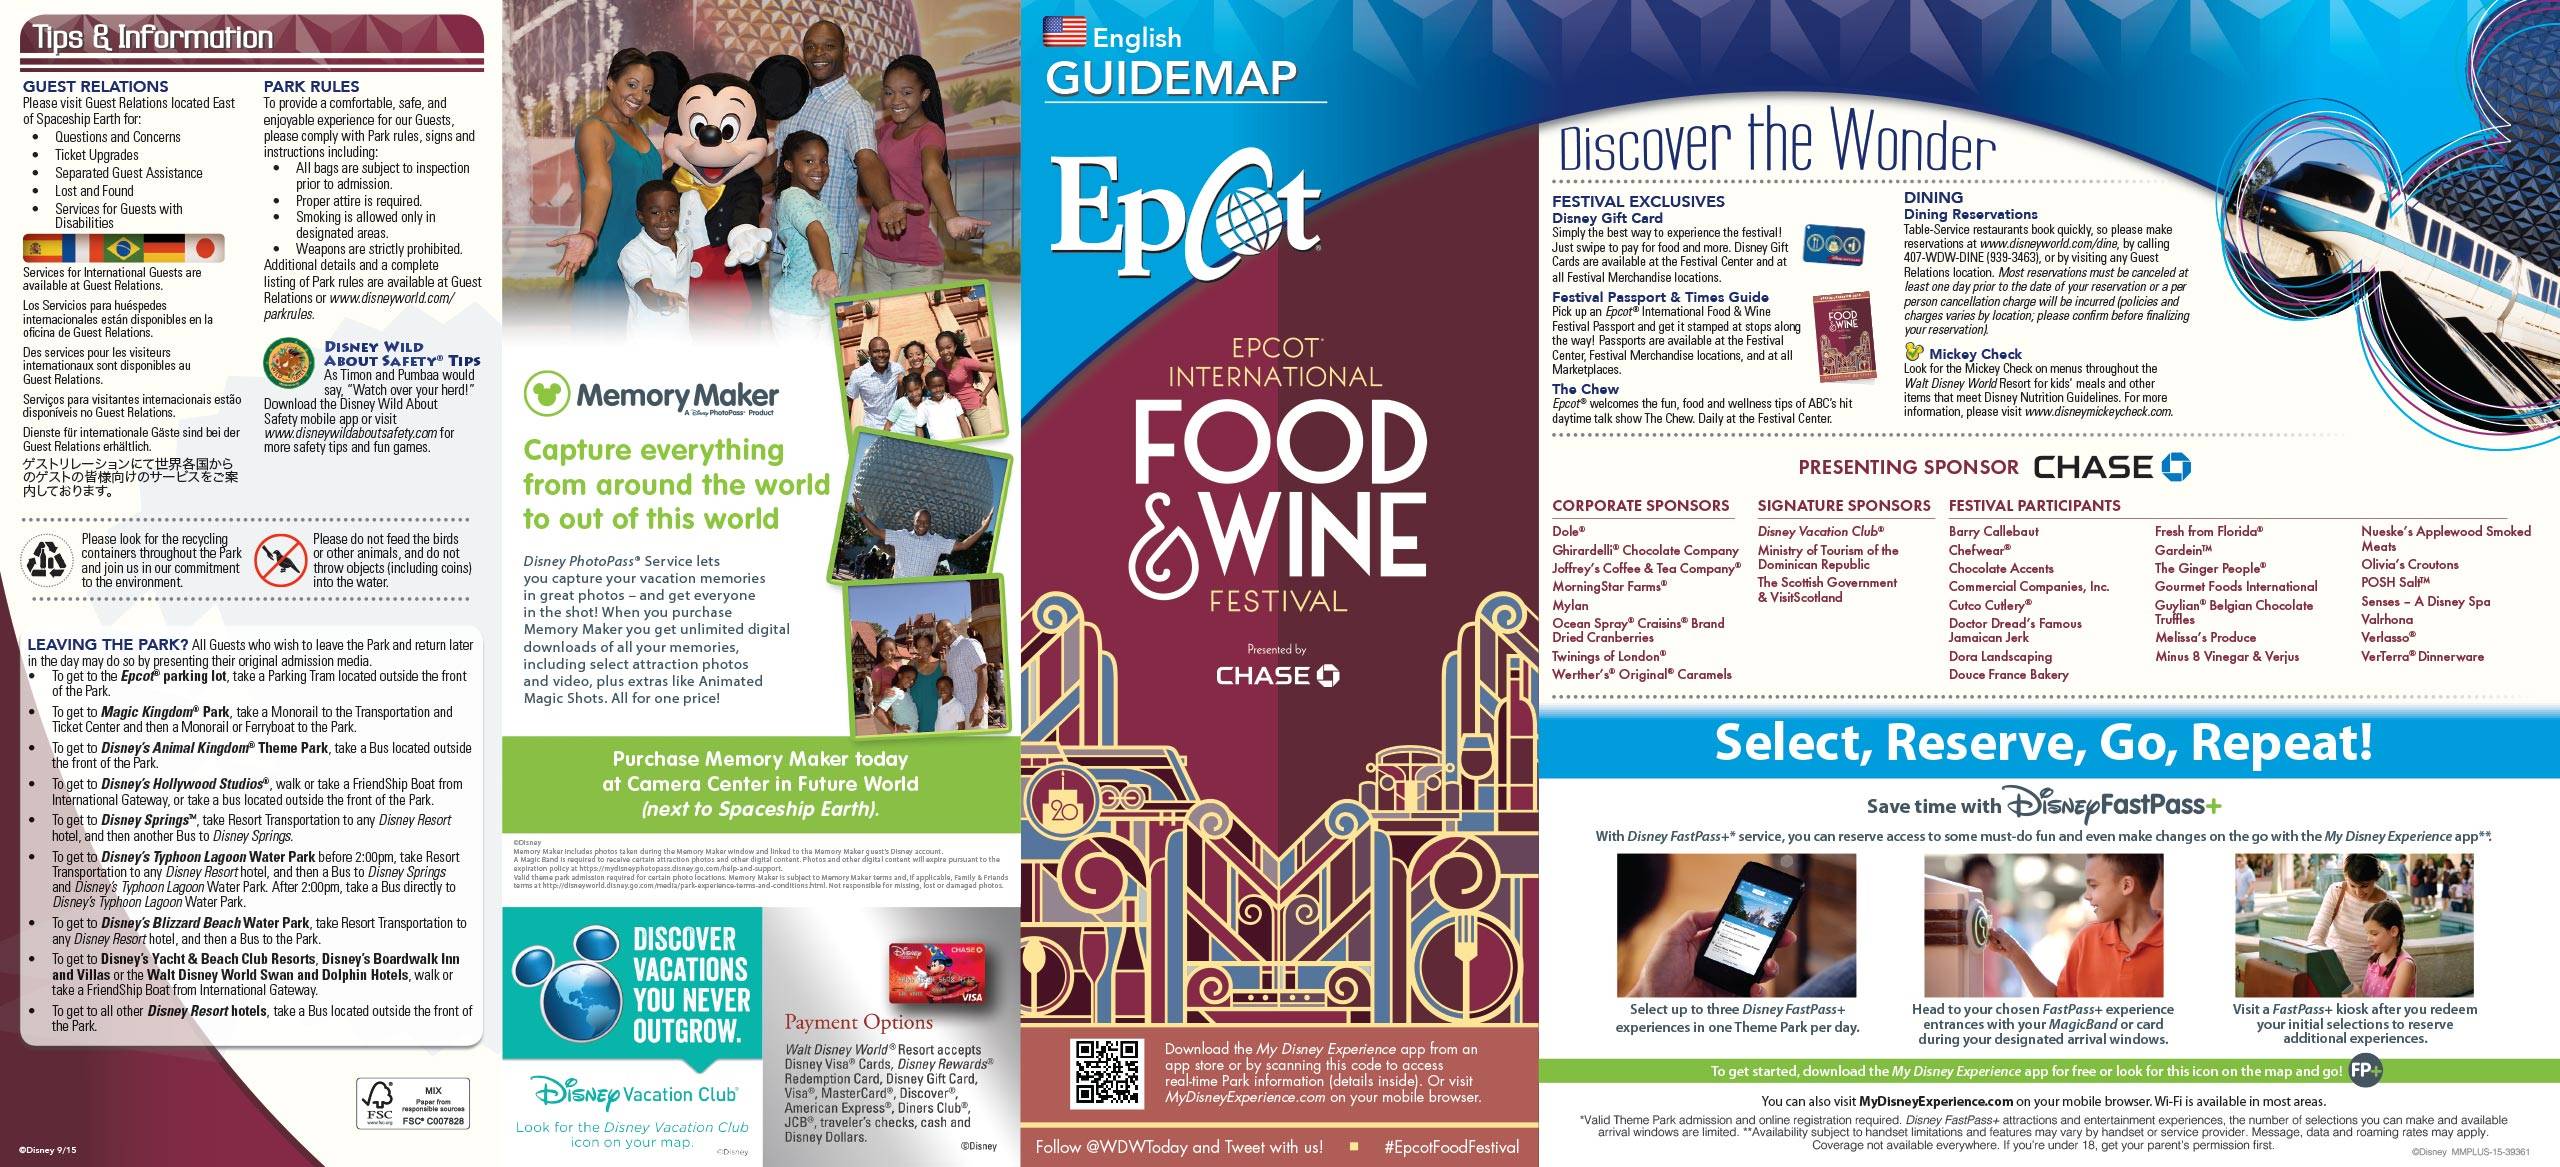 2015 Epcot International Food and Wine Festival Guide Map